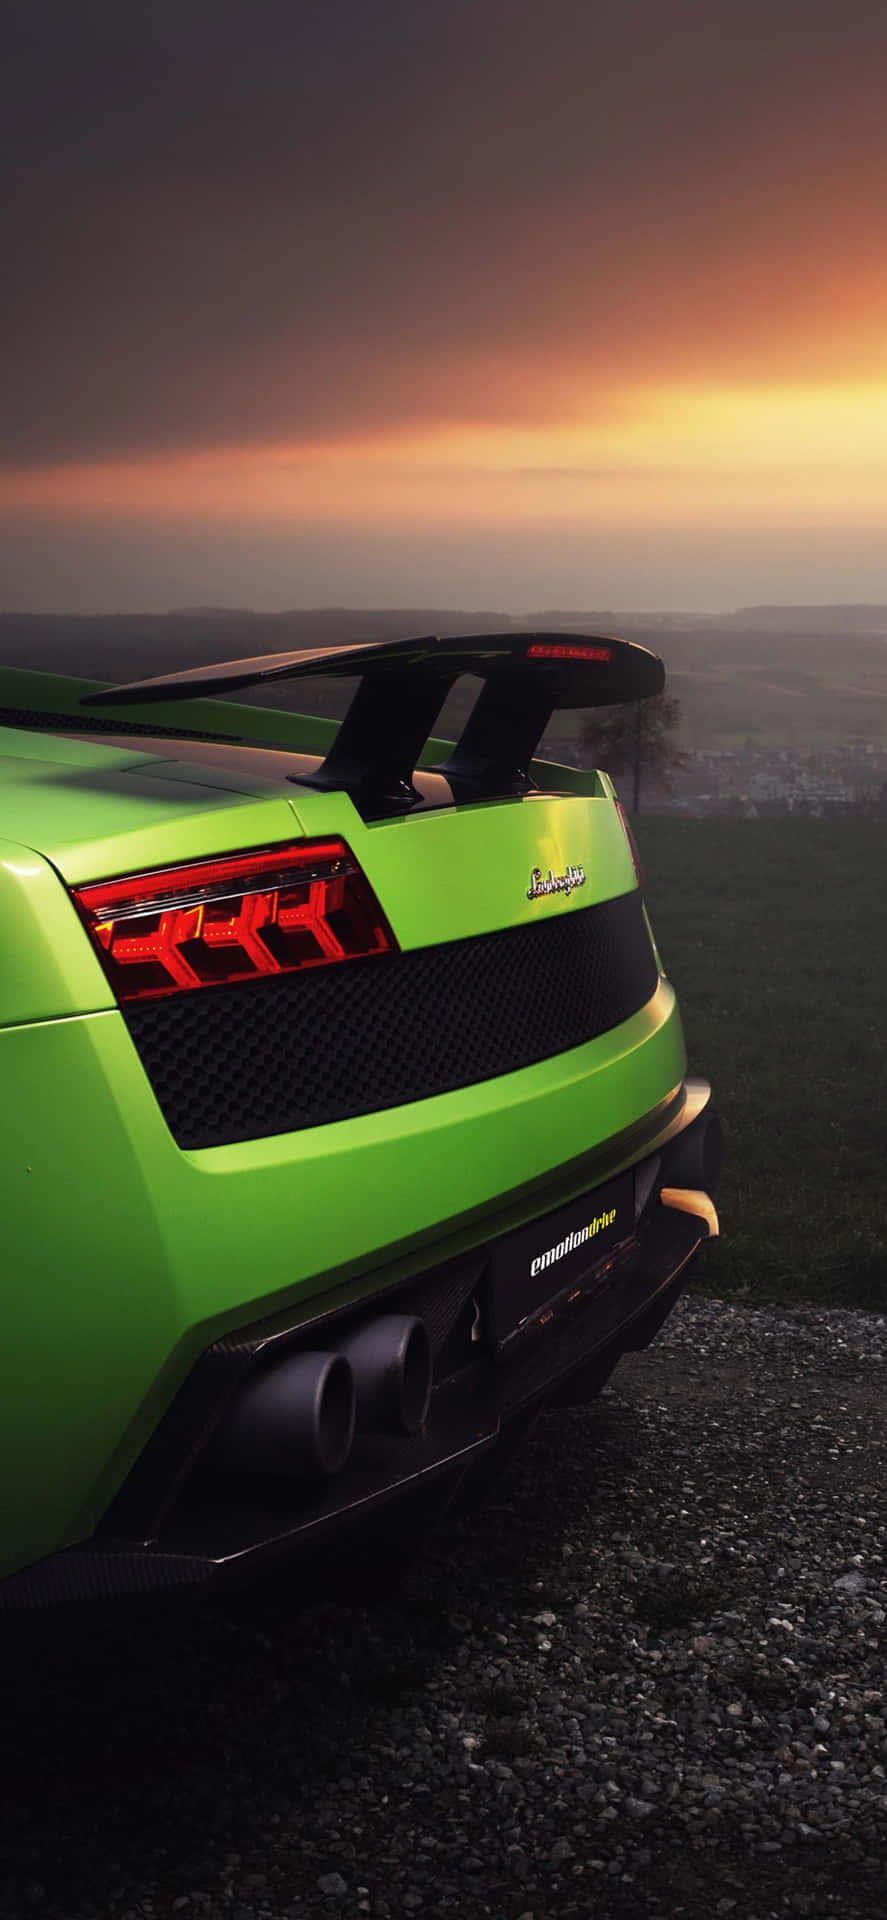 “Experience an unprecedented blend of luxury and performance with the green Lamborghini iPhone.” Wallpaper